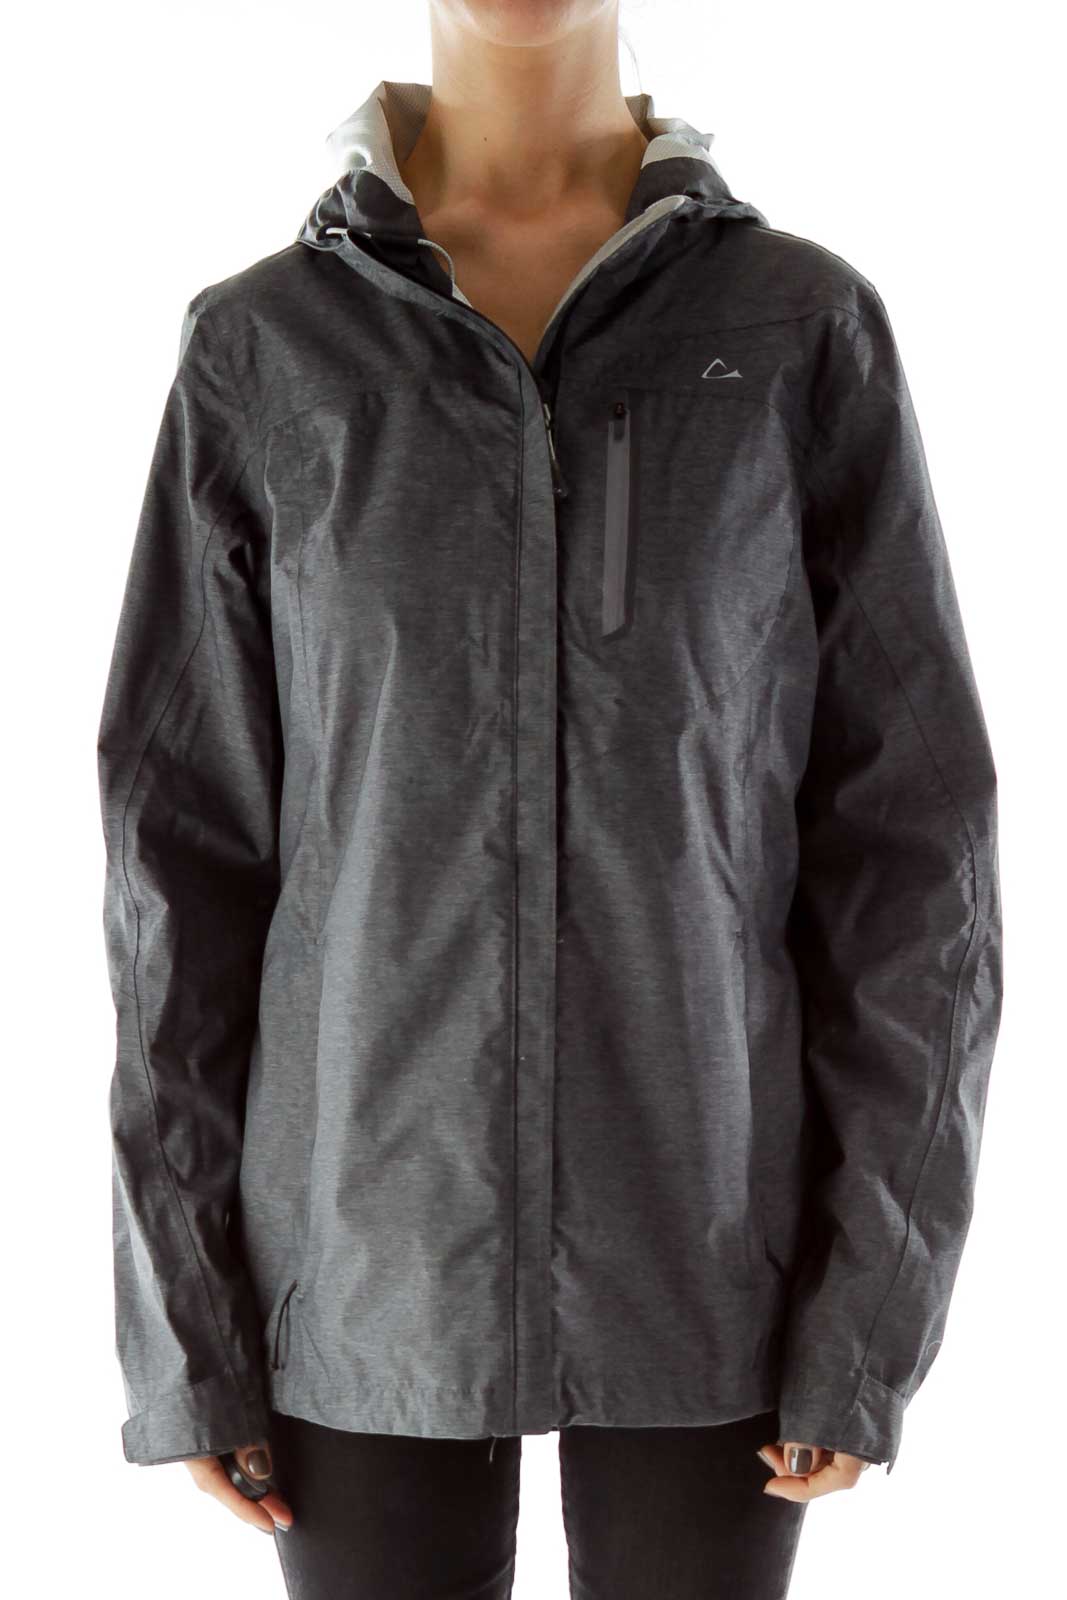 Gray Hooded Pocketed Rainproof Sports Jacket Front